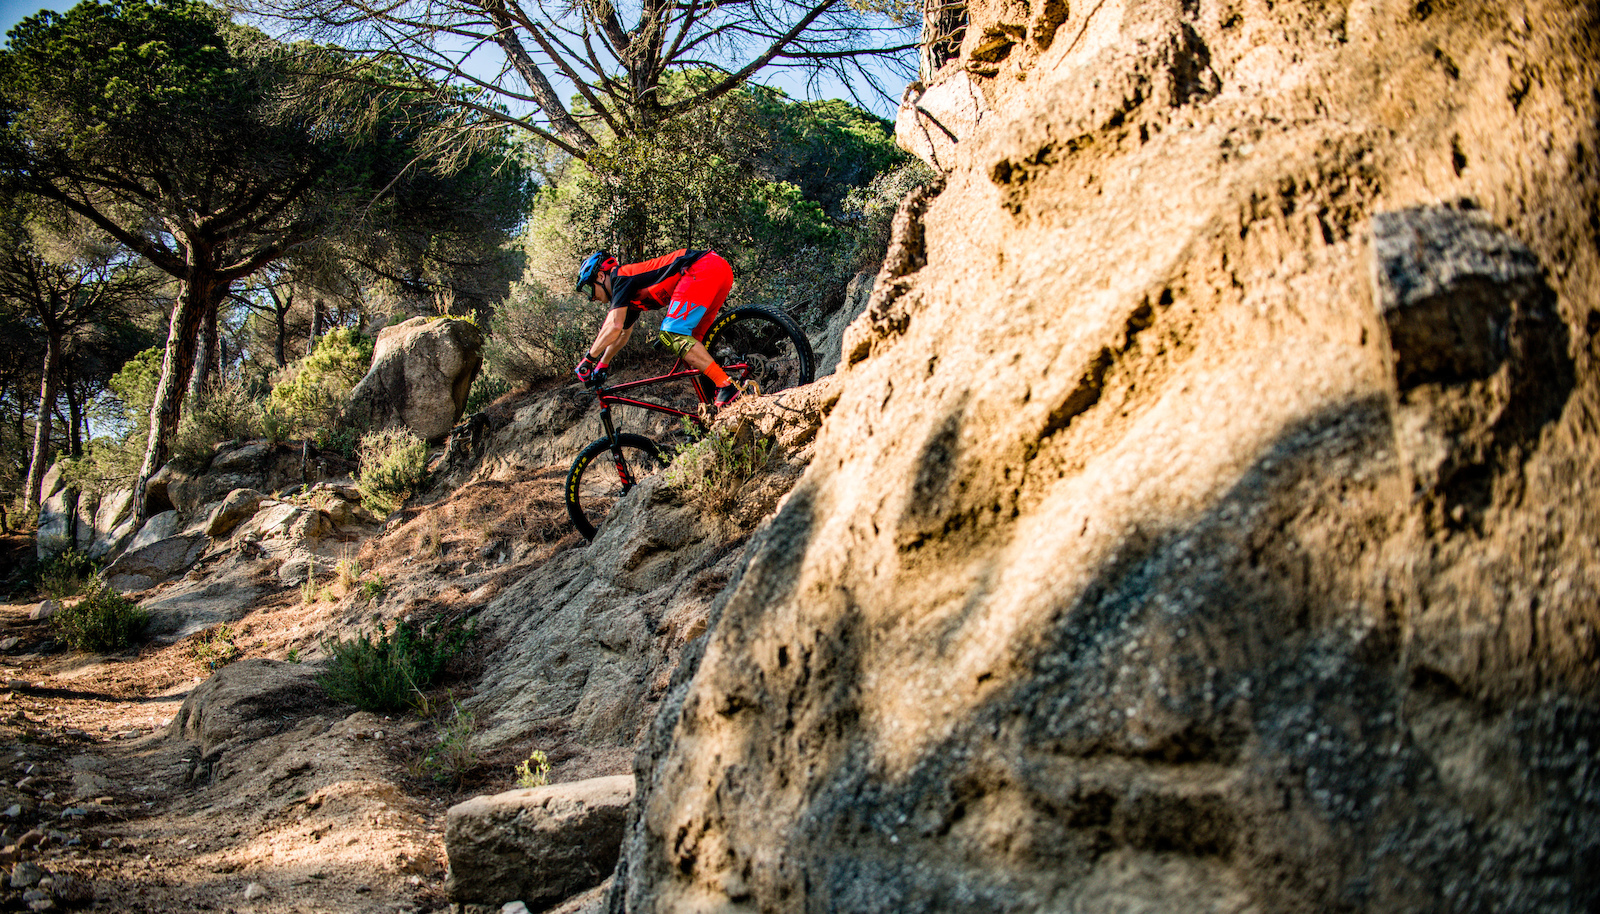 Trails above Premia de Dalt were a perfect place for testing how much fun there can be from riding a trail hardtail with 27.5+ wheels.